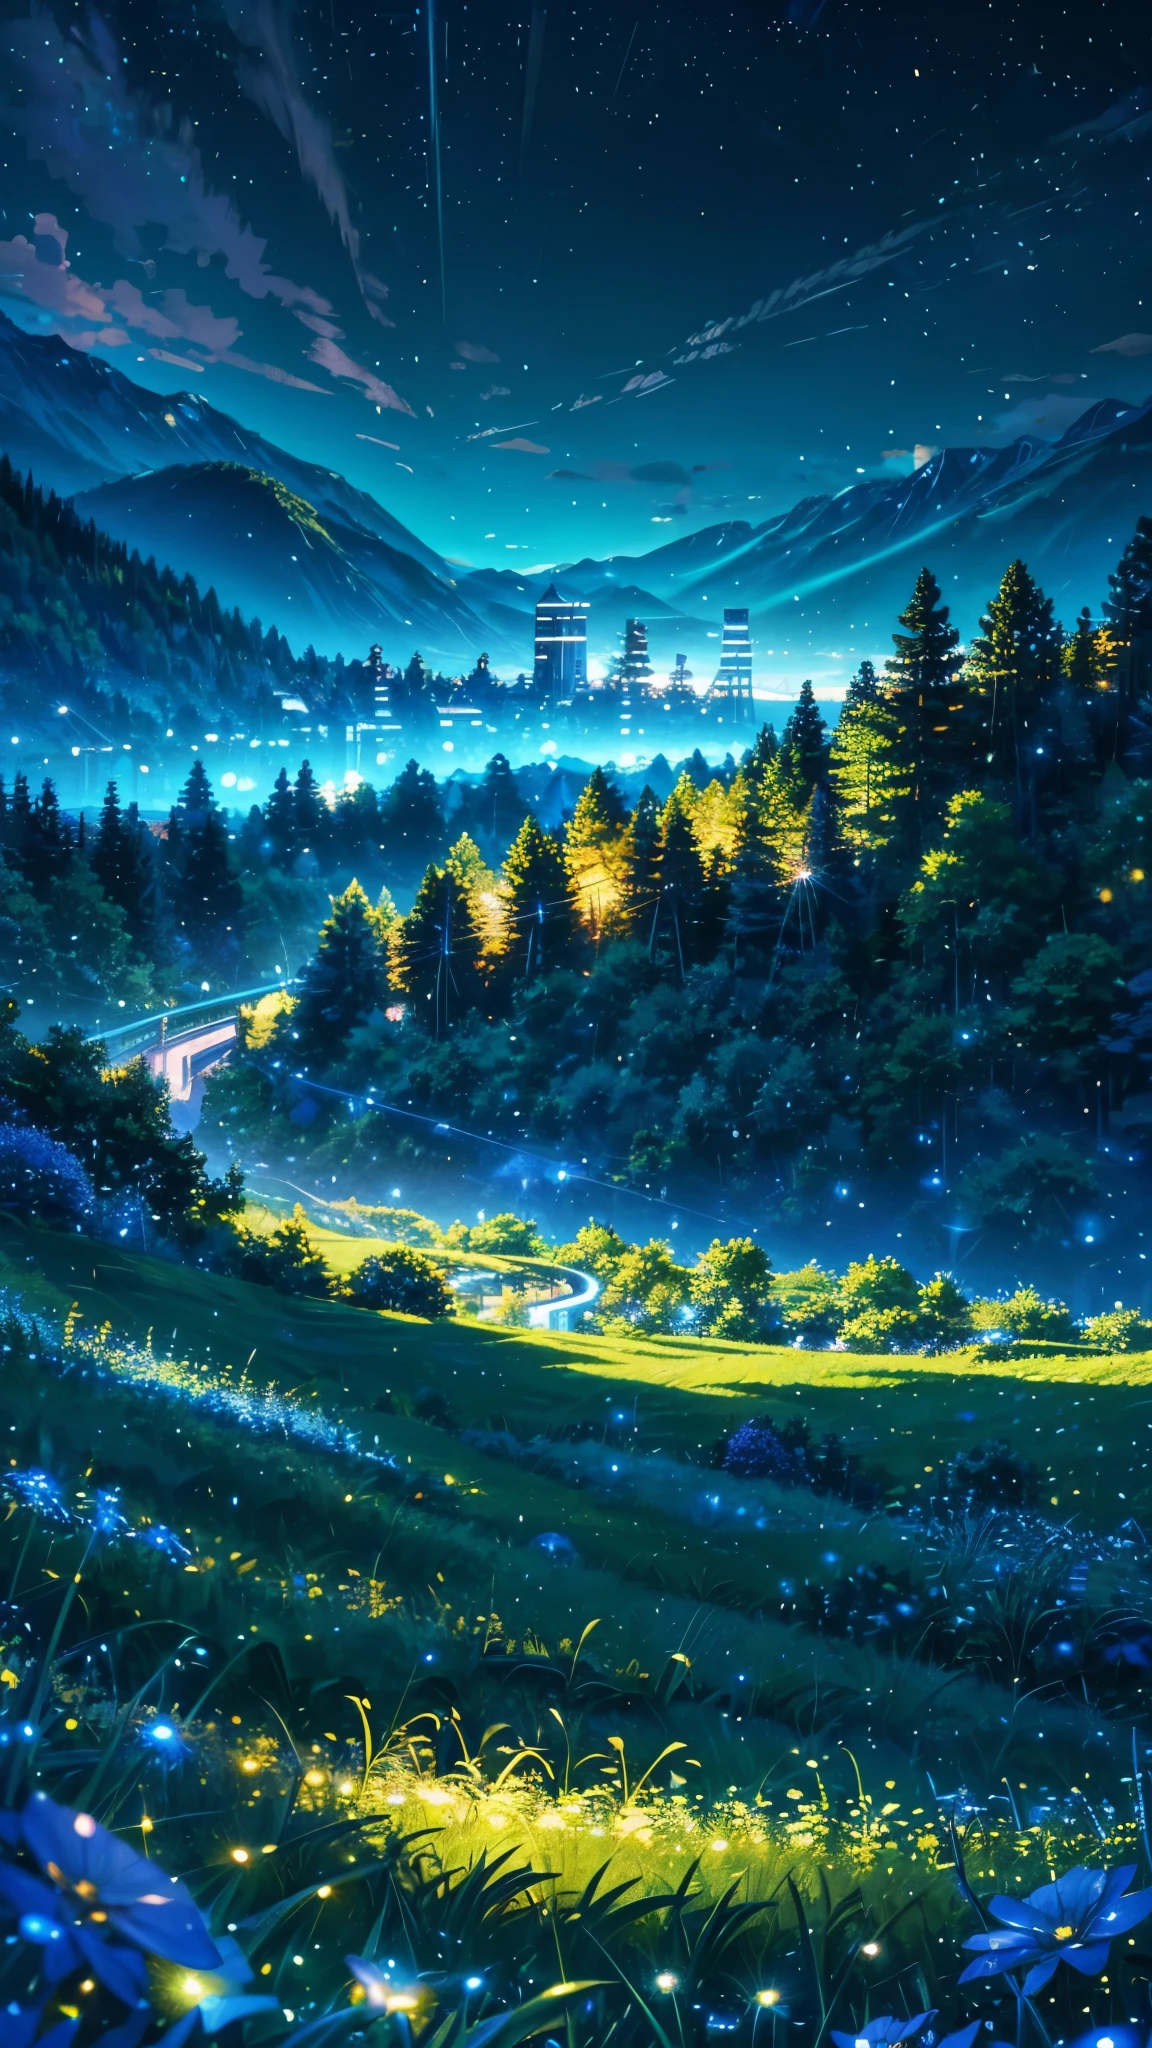 anime inspired greenery landscape alps with bright blue glass like sky shinning twinkling sparkling effect(bokeh effect) (fireflies)